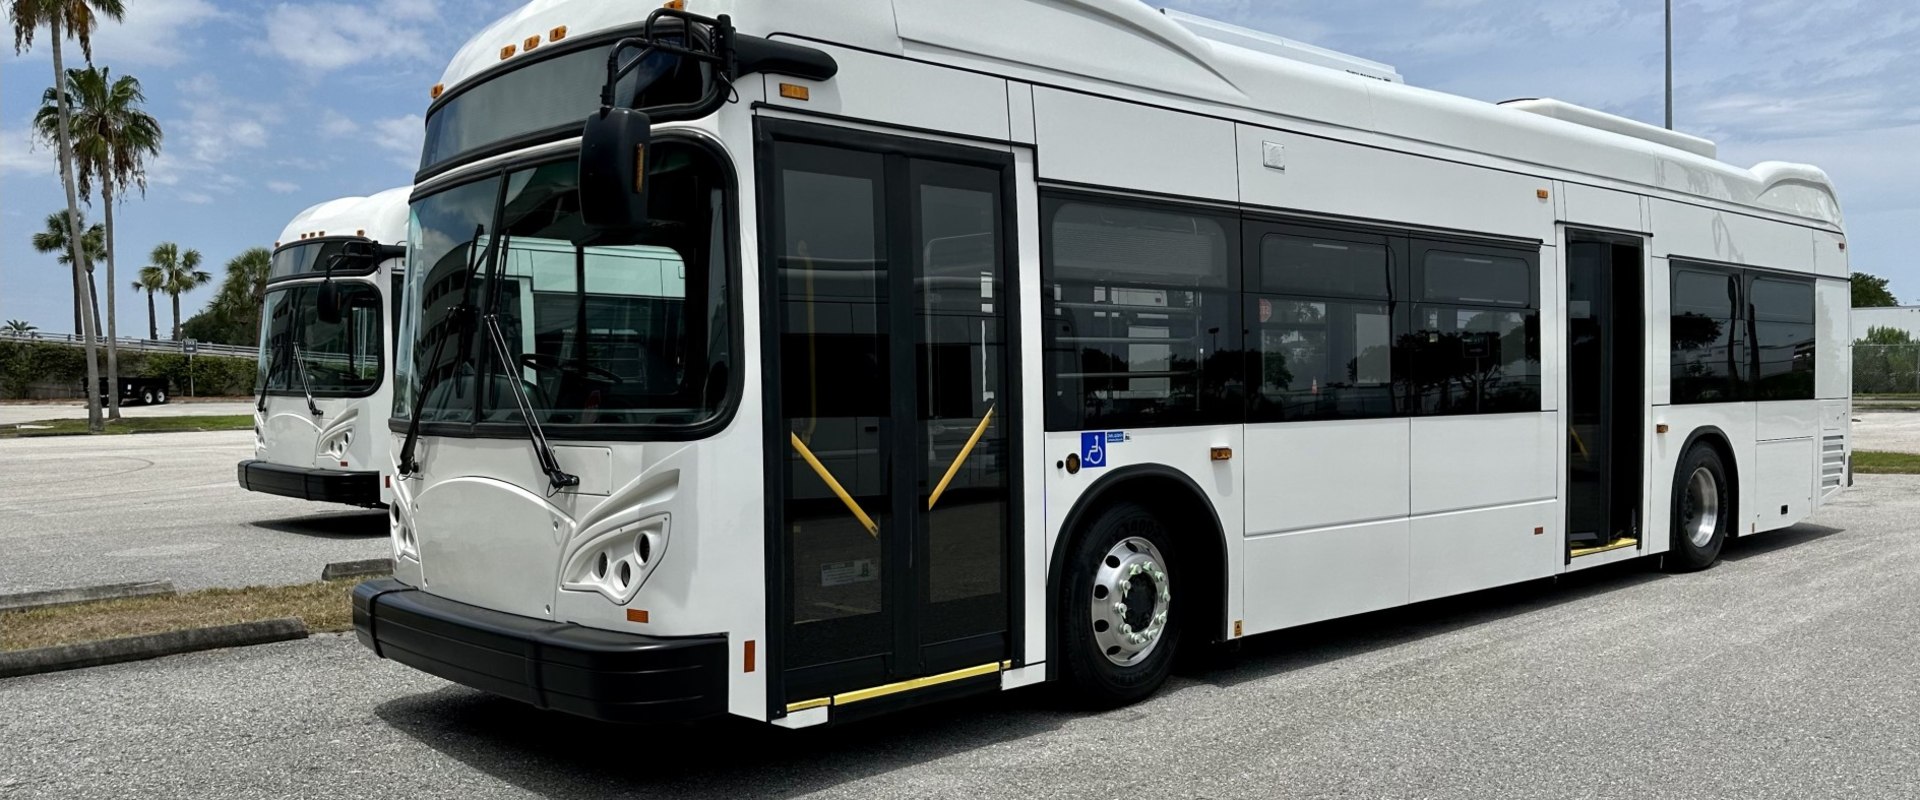 Accessibility of Public Transportation for People with Disabilities in Hillsborough County, FL